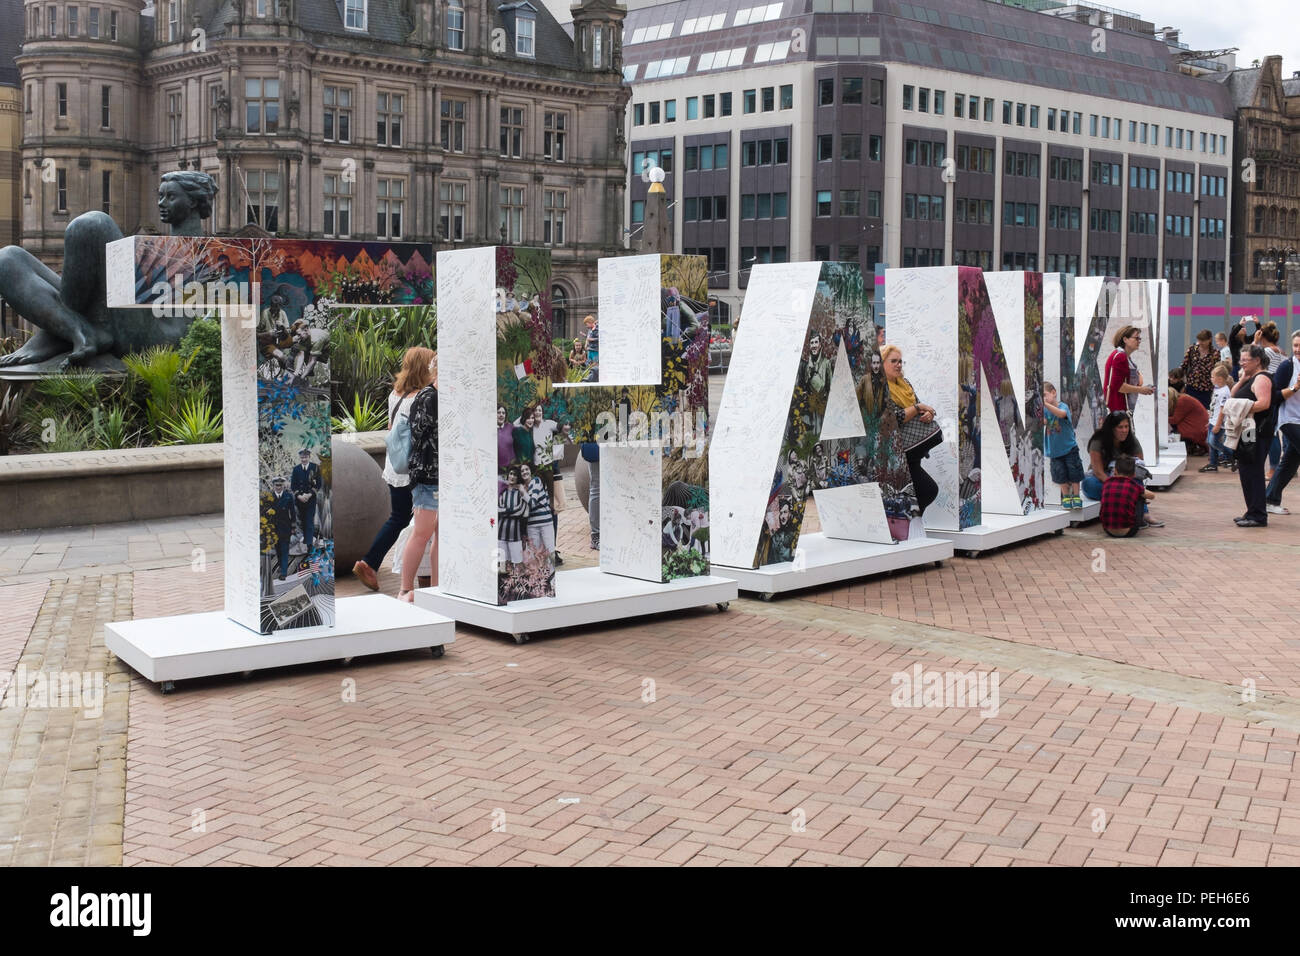 Birmingham, UK 15th August 2018. The Royal British Legion #Thankyou100 installation in Victoria Square allows members of the public to write personal messages of thanks to the WW1 generation.Credit: Nick Maslen/Alamy Live News Stock Photo